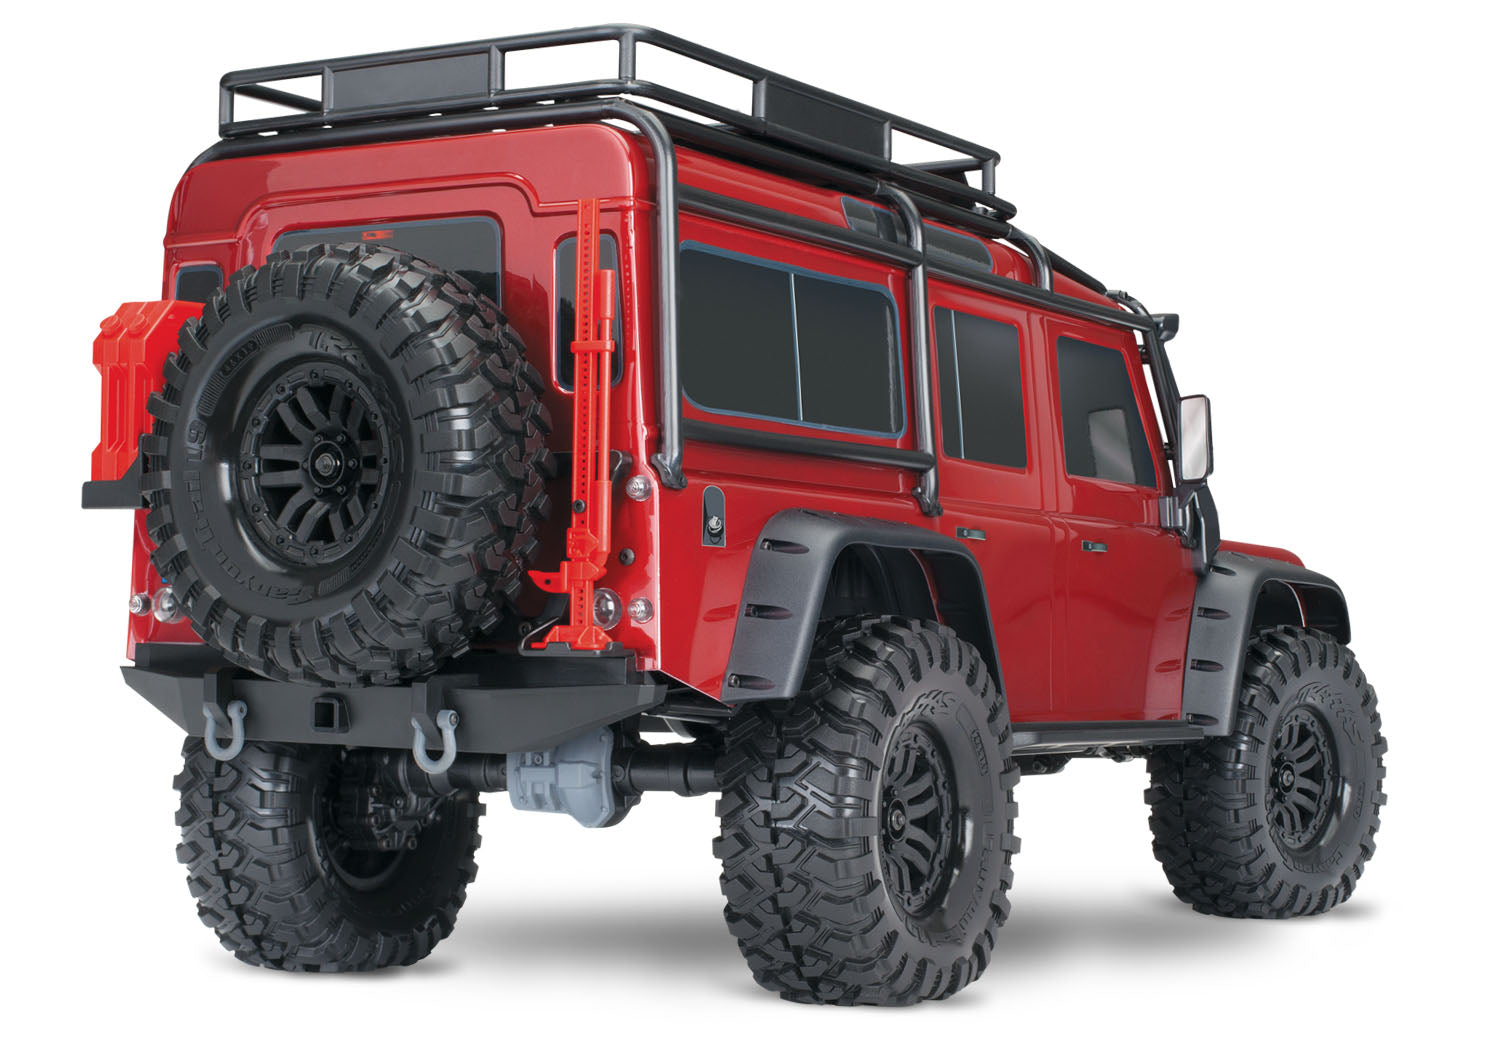 TRAXXAS TRX-4 Scale and Trail Land Rover Defender 4WD Electric Crawler w/ XL5 HV (Red) - 82056-4